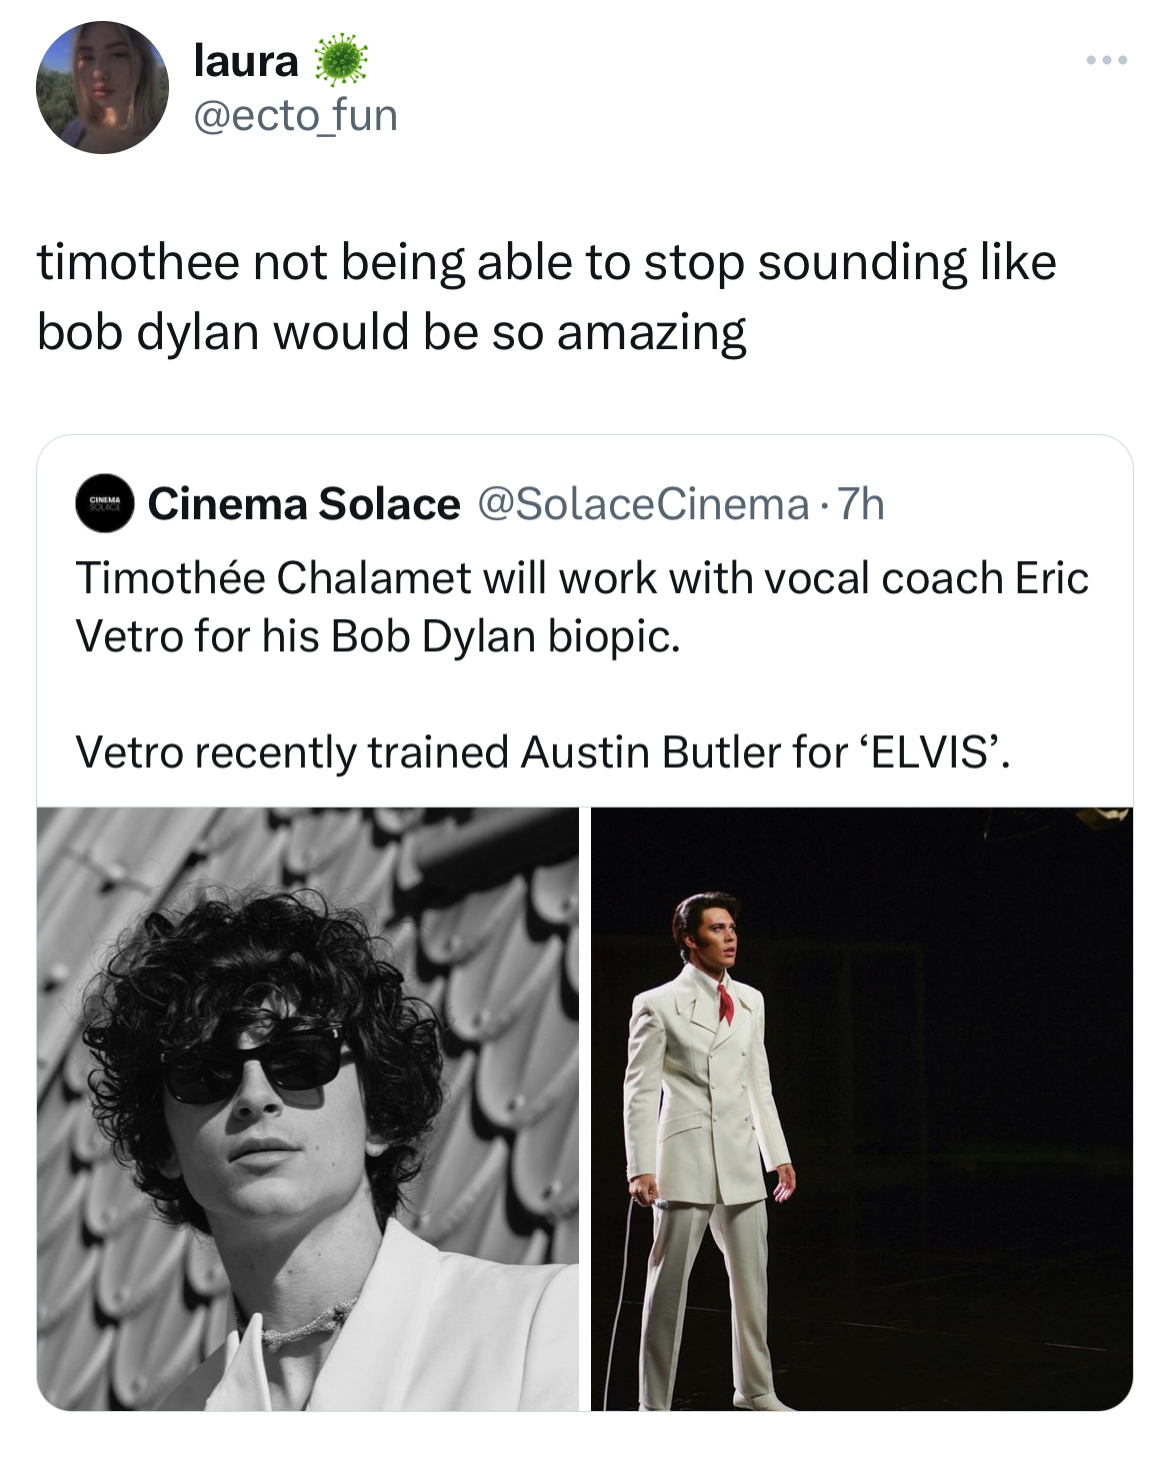 hall of fame tweets -shoulder - laura timothee not being able to stop sounding bob dylan would be so amazing Cinema Solace 7h Timothe Chalamet will work with vocal coach Eric Vetro for his Bob Dylan biopic. Vetro recently trained Austin Butler for 'Elvis'